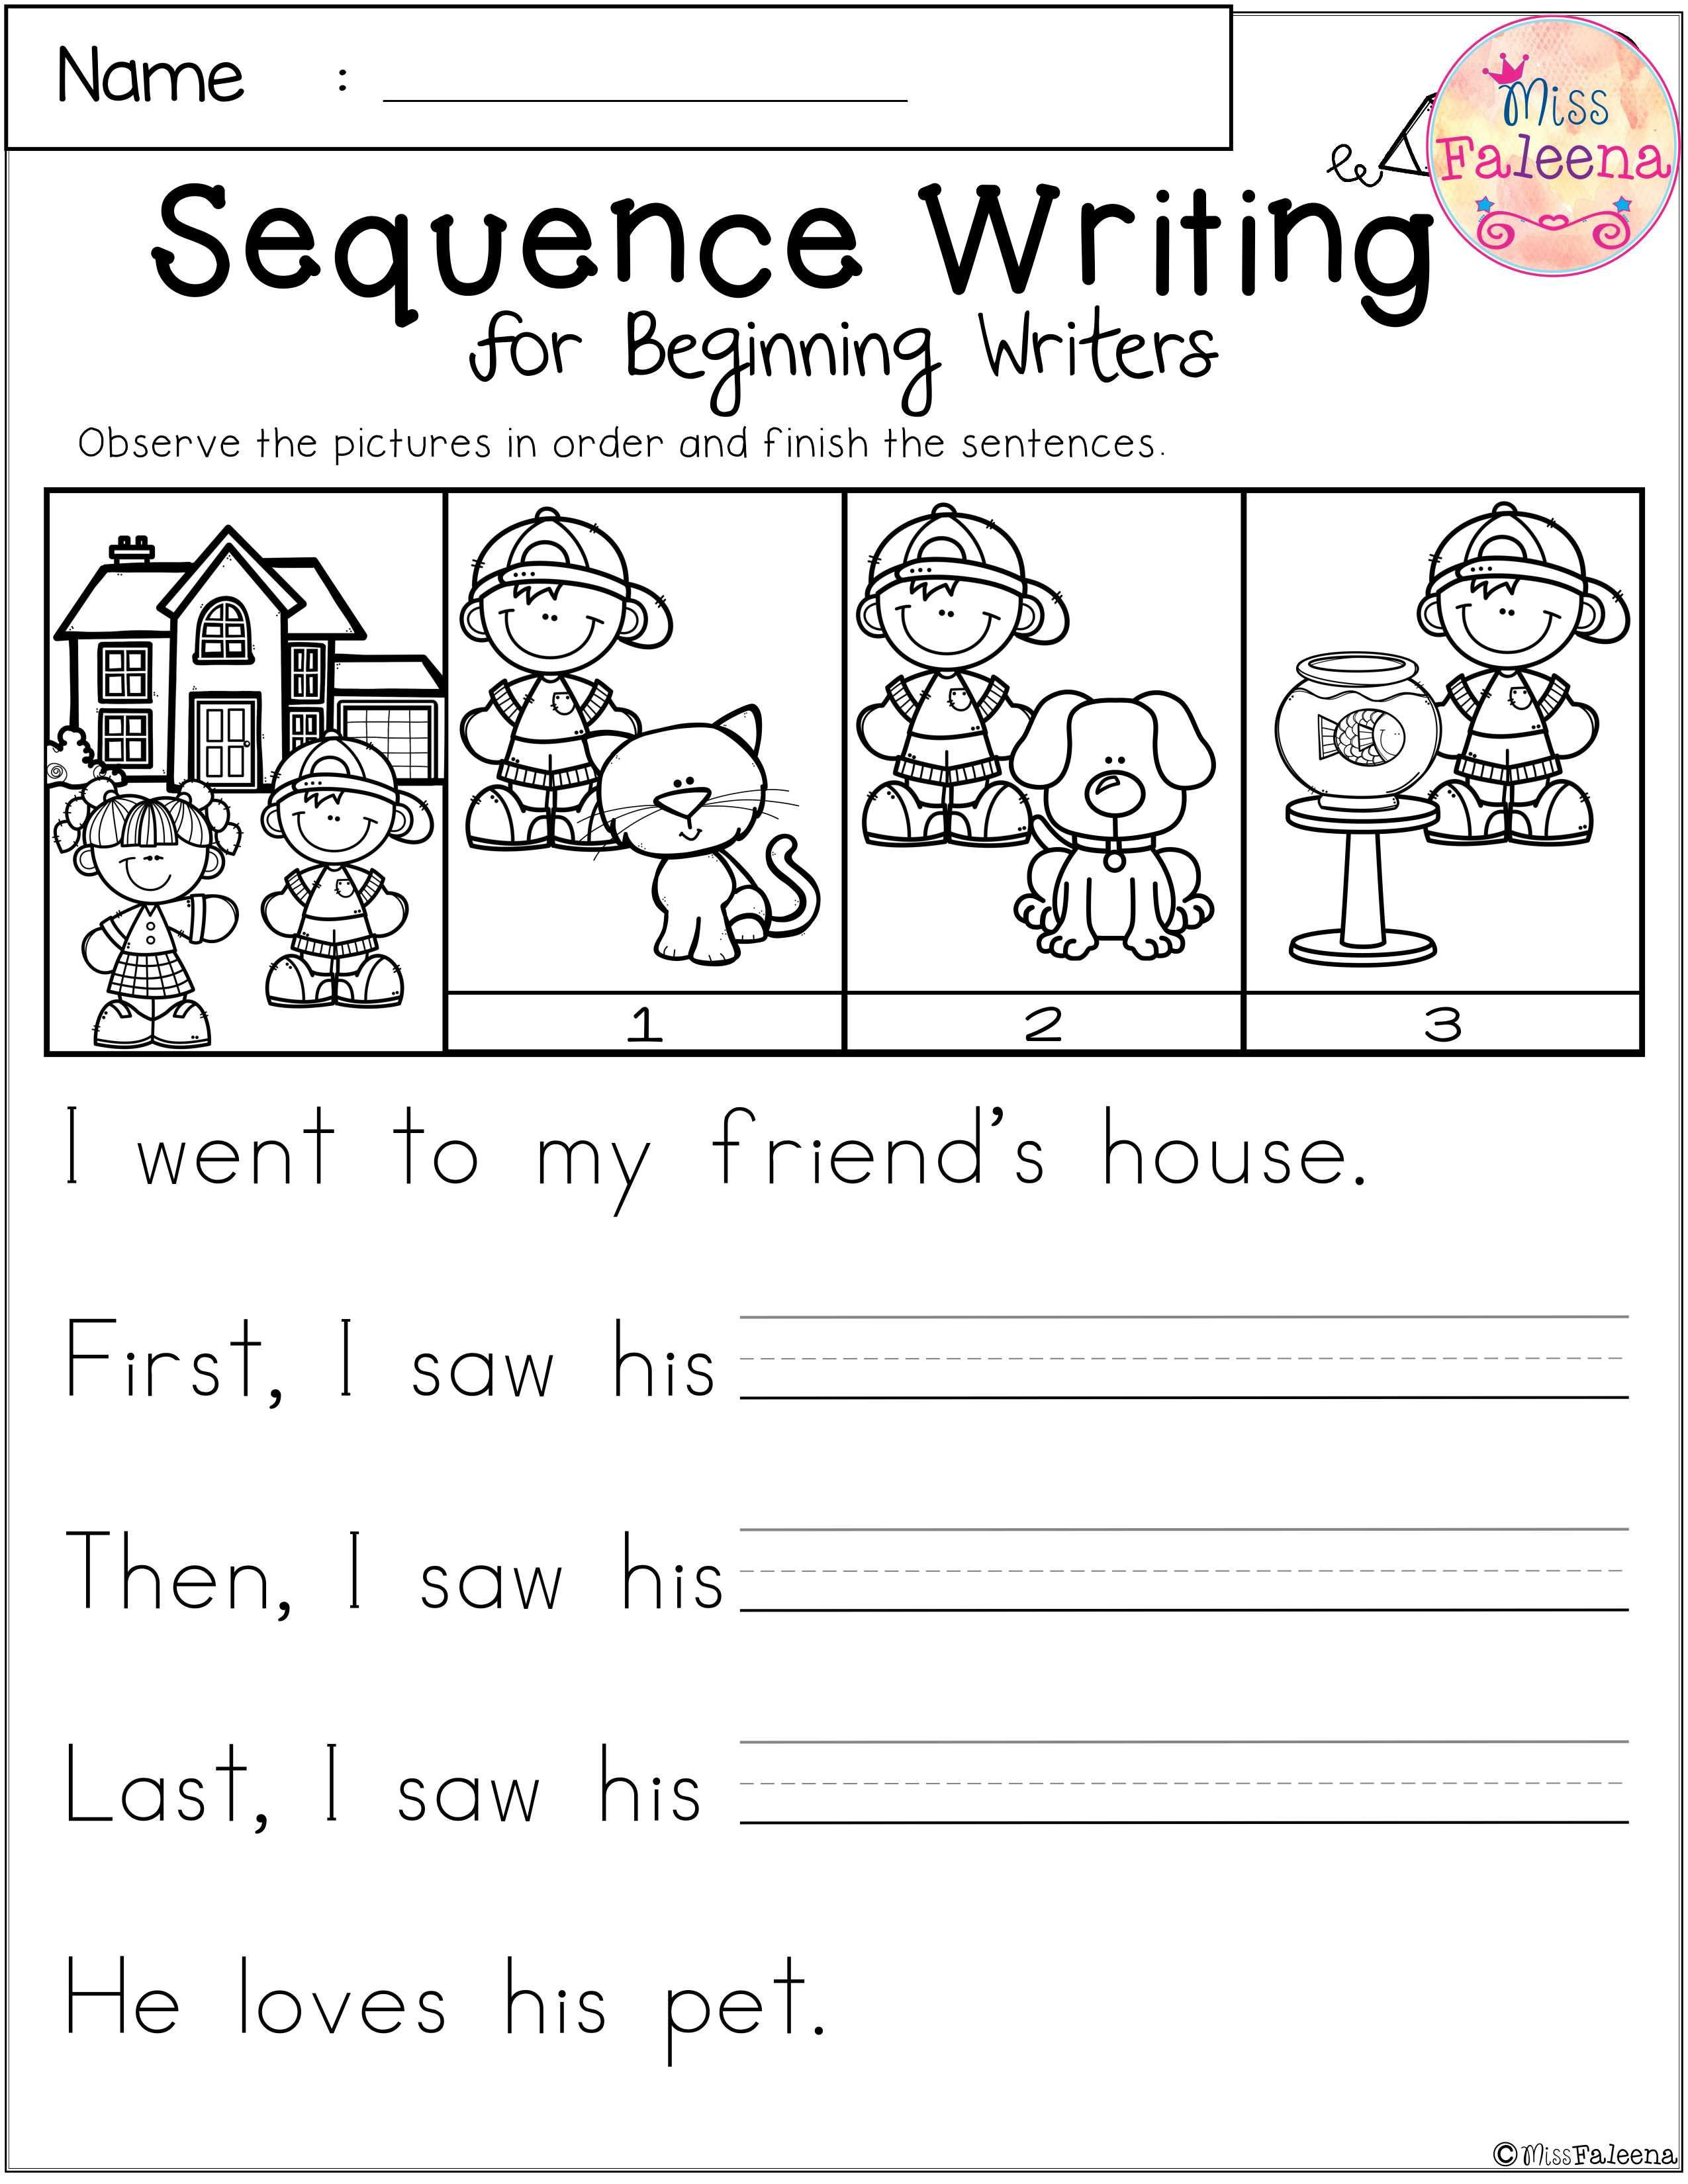 Sequence Worksheets 2nd Grade Free Sequence Writing for Beginning Writers with Images